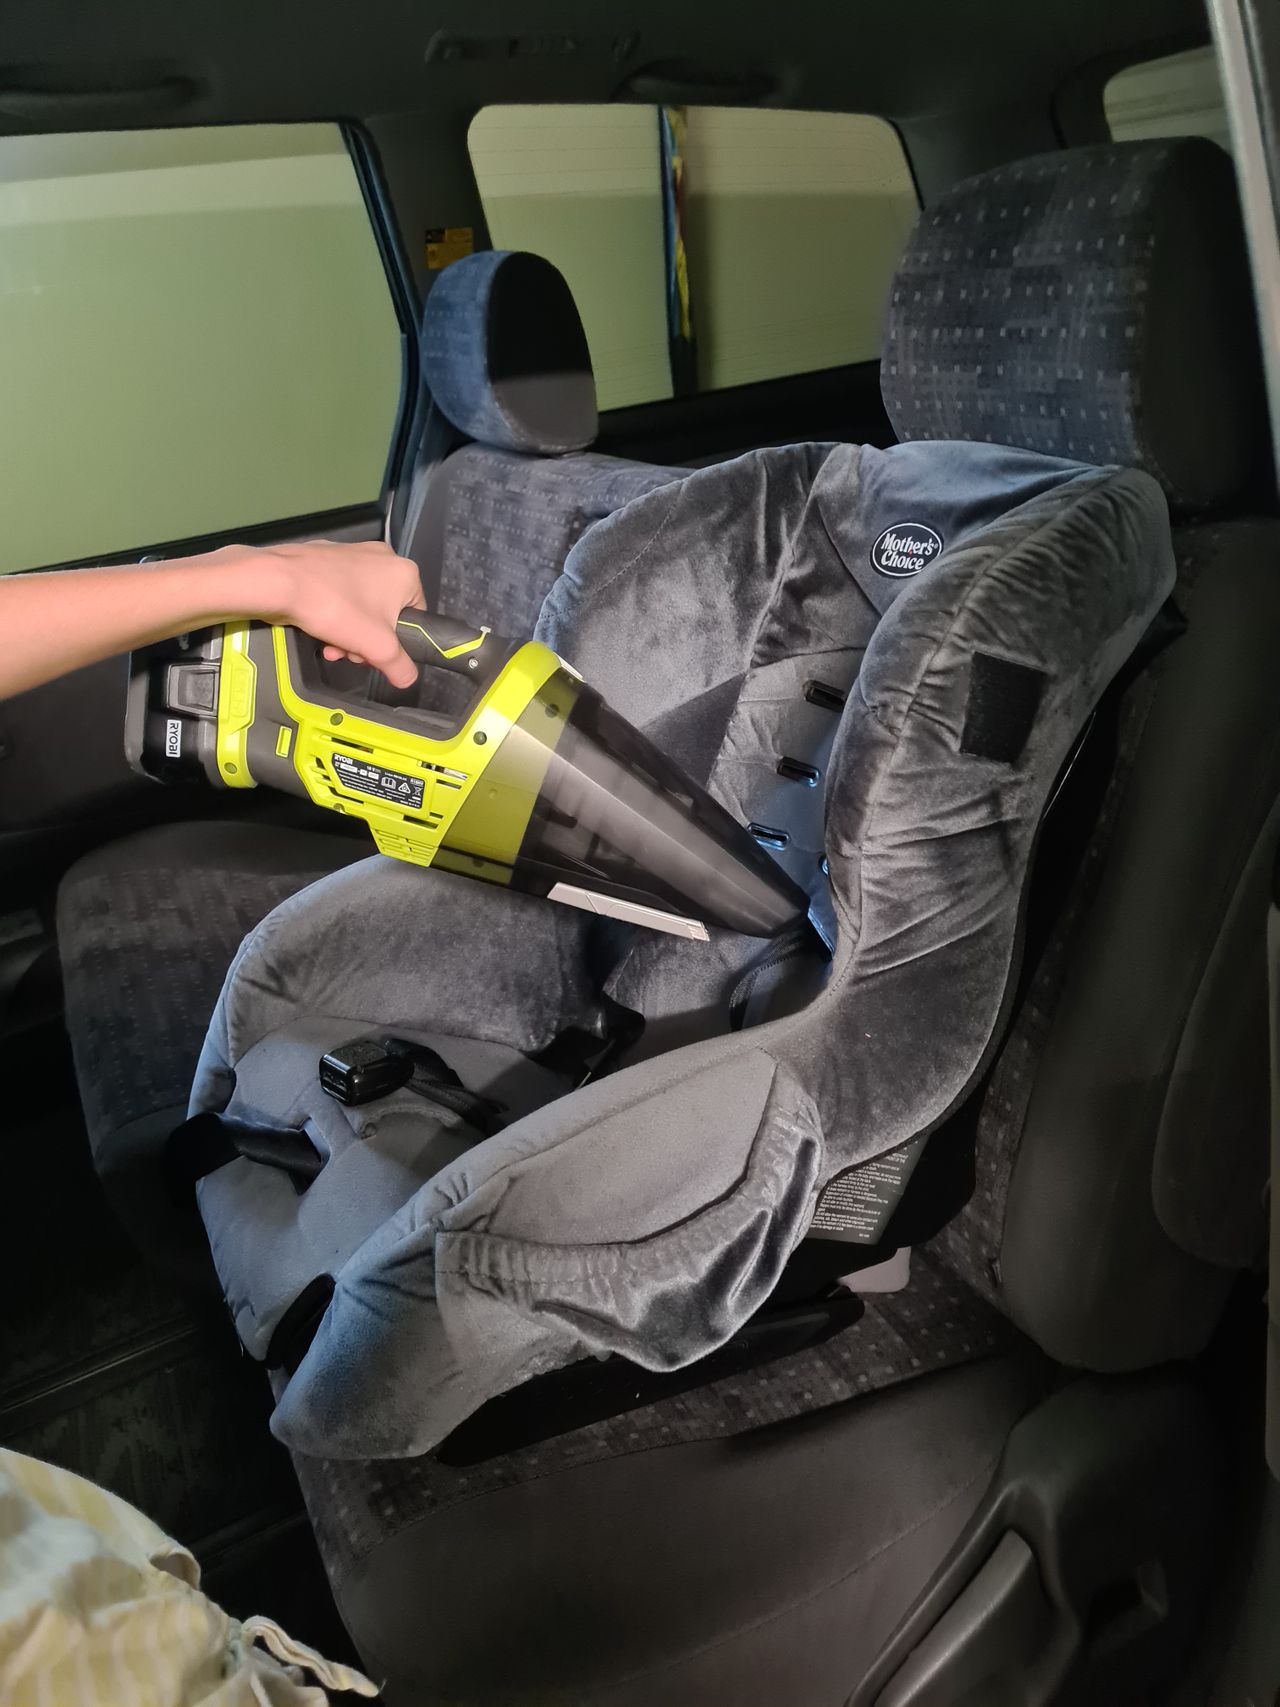 Long weekend road trips can only mean one thing .... an explosion of crumbs in the baby seat! Thank goodness for my Ryobi vacuum! 